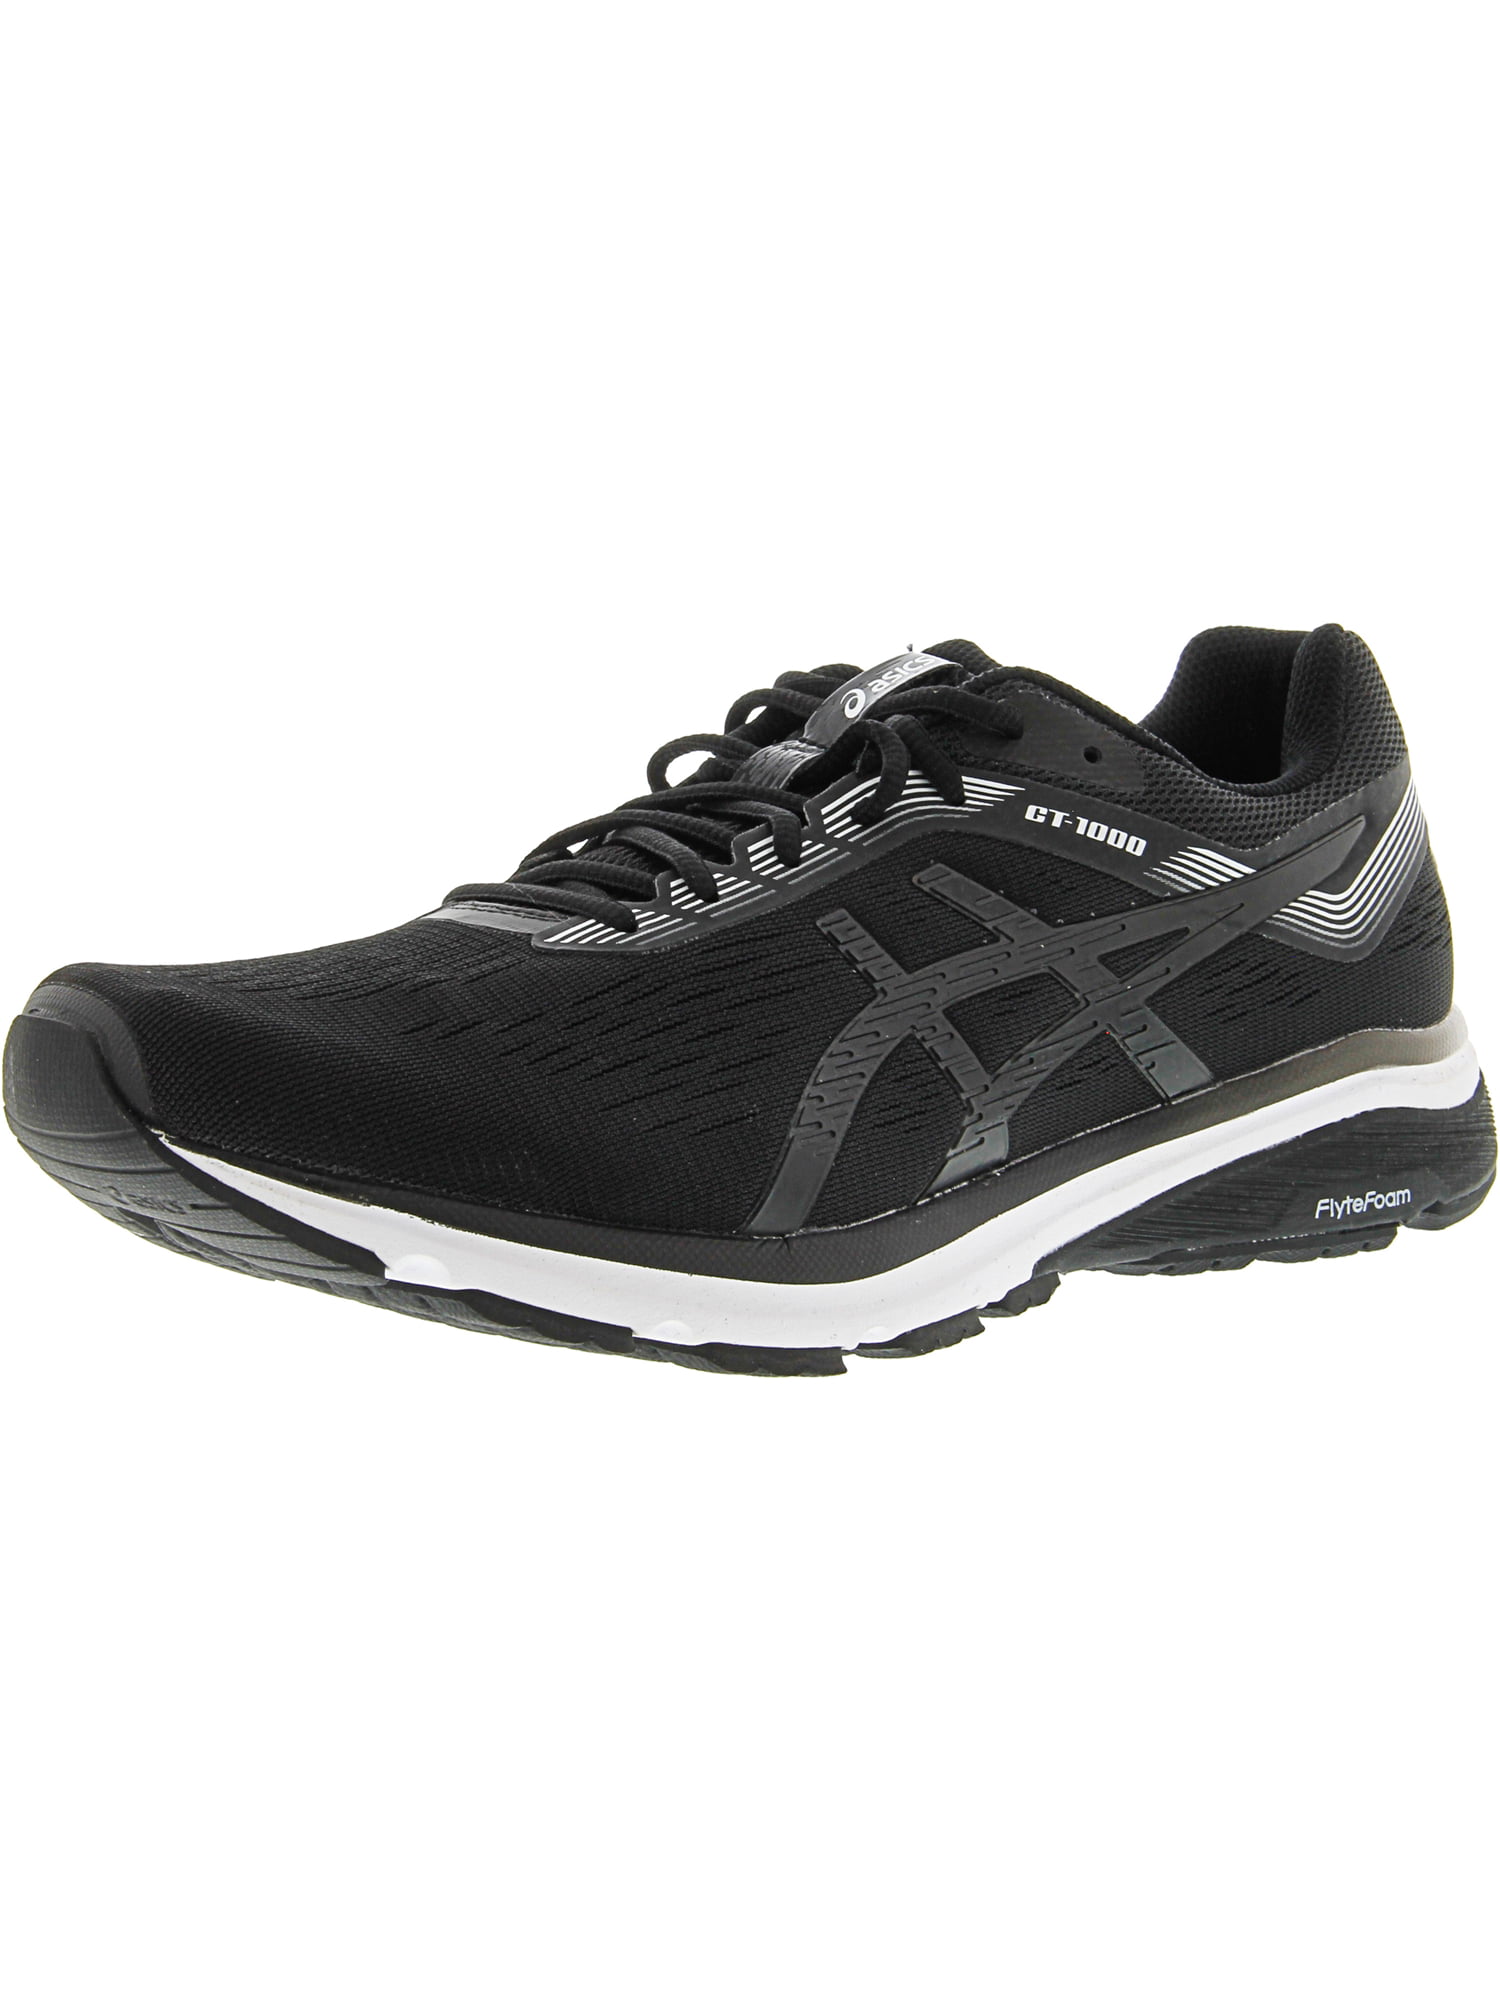 asics mens running shoes size 9